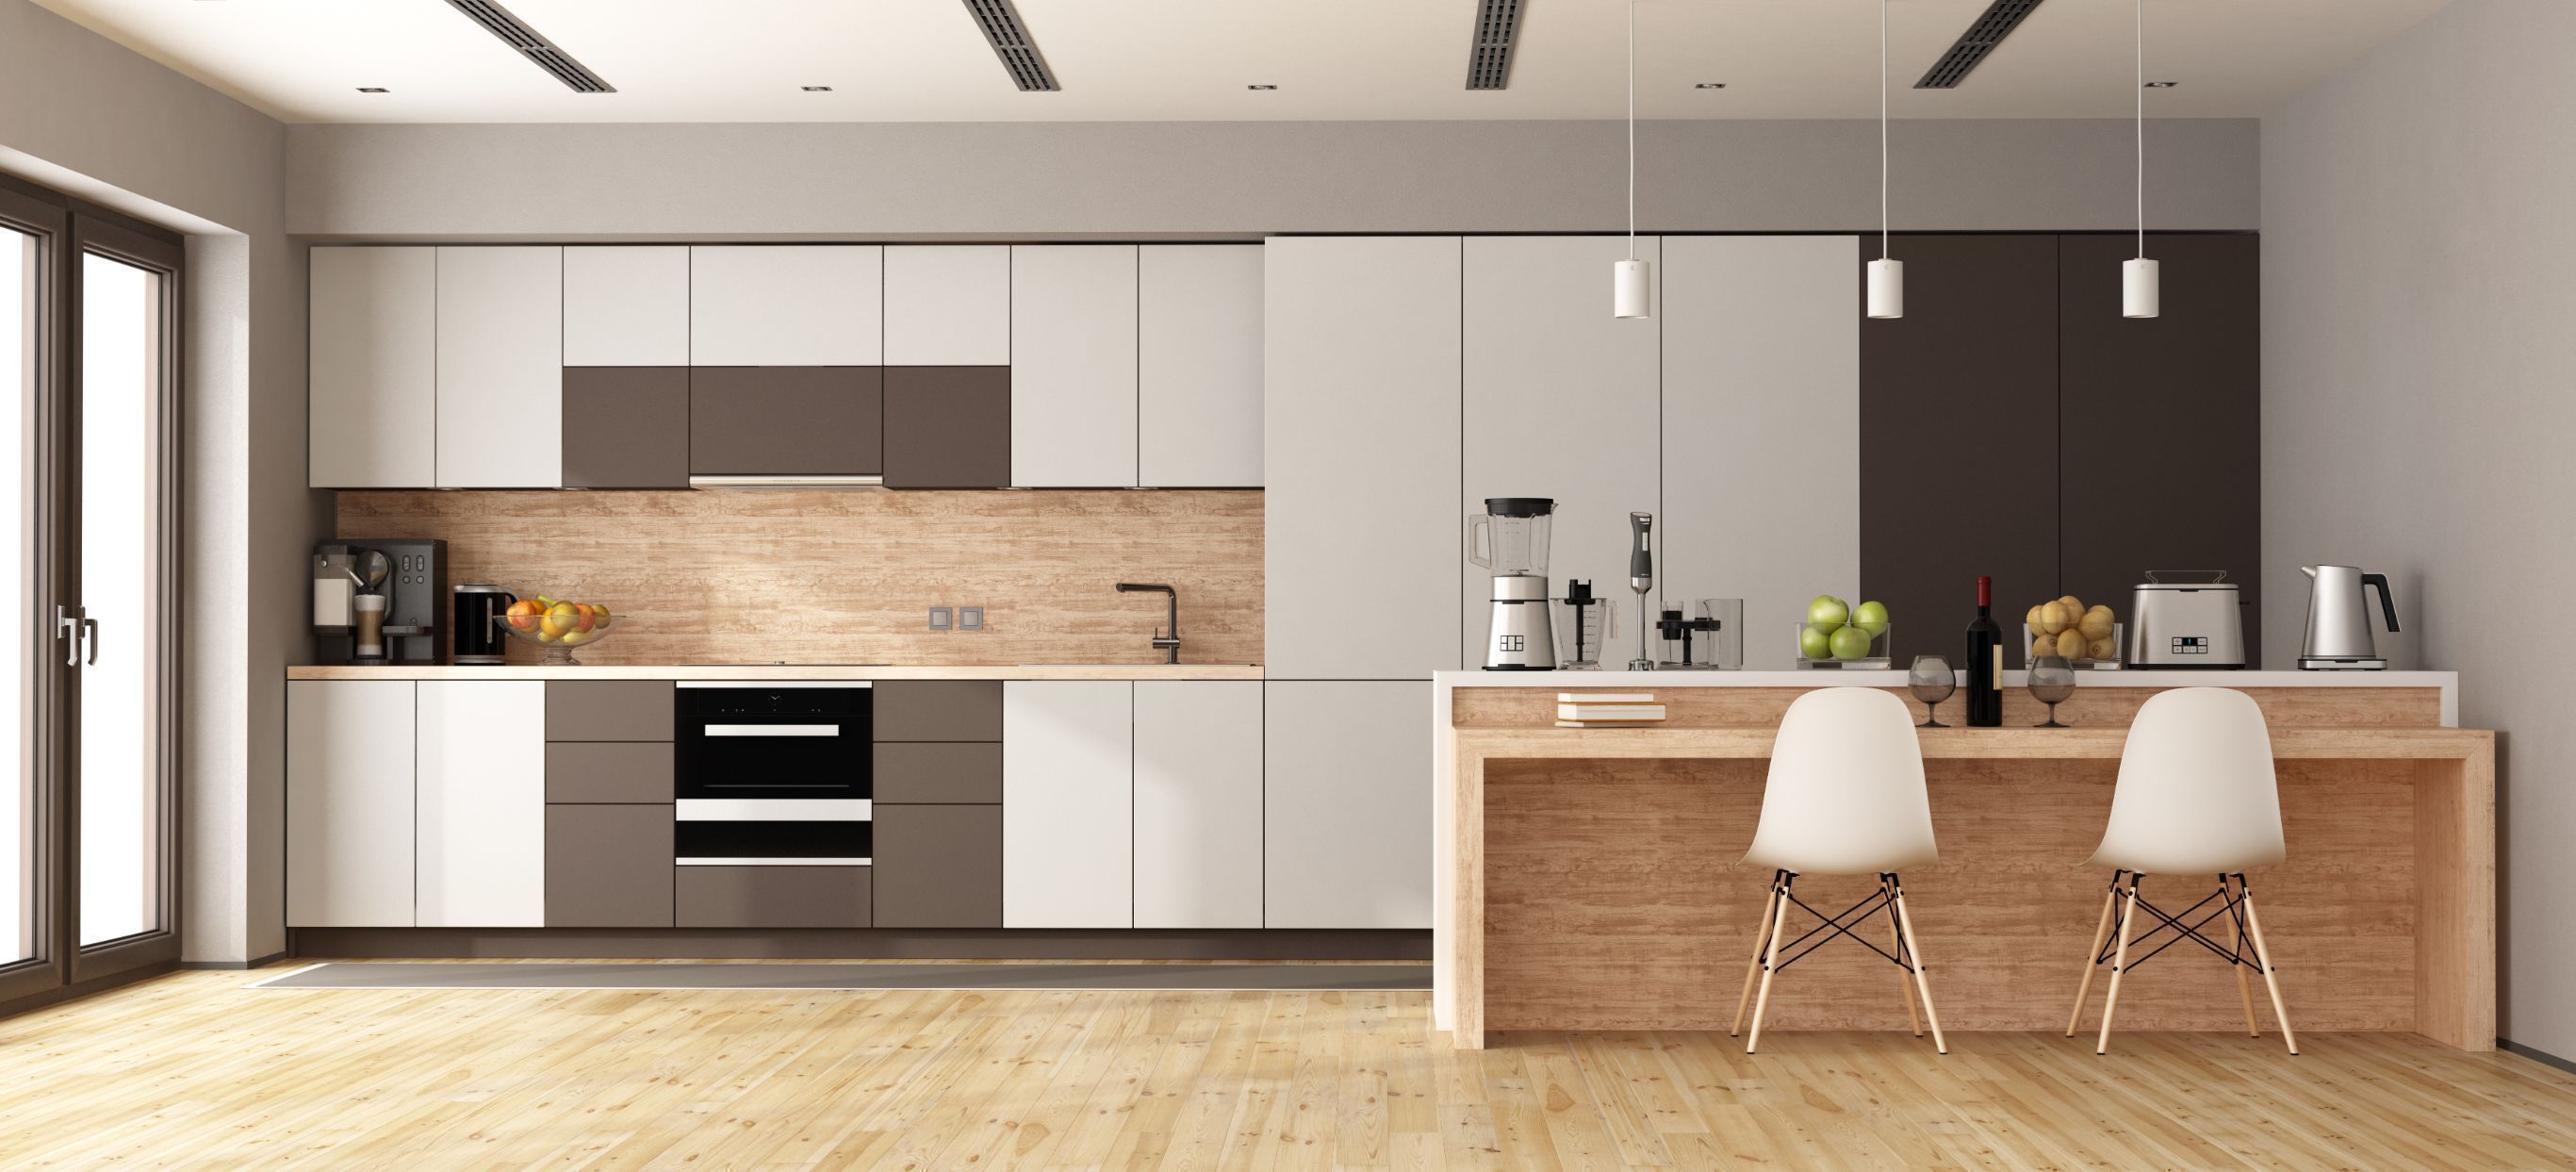 20 Luxury Modern Kitchen Designs for Your Home